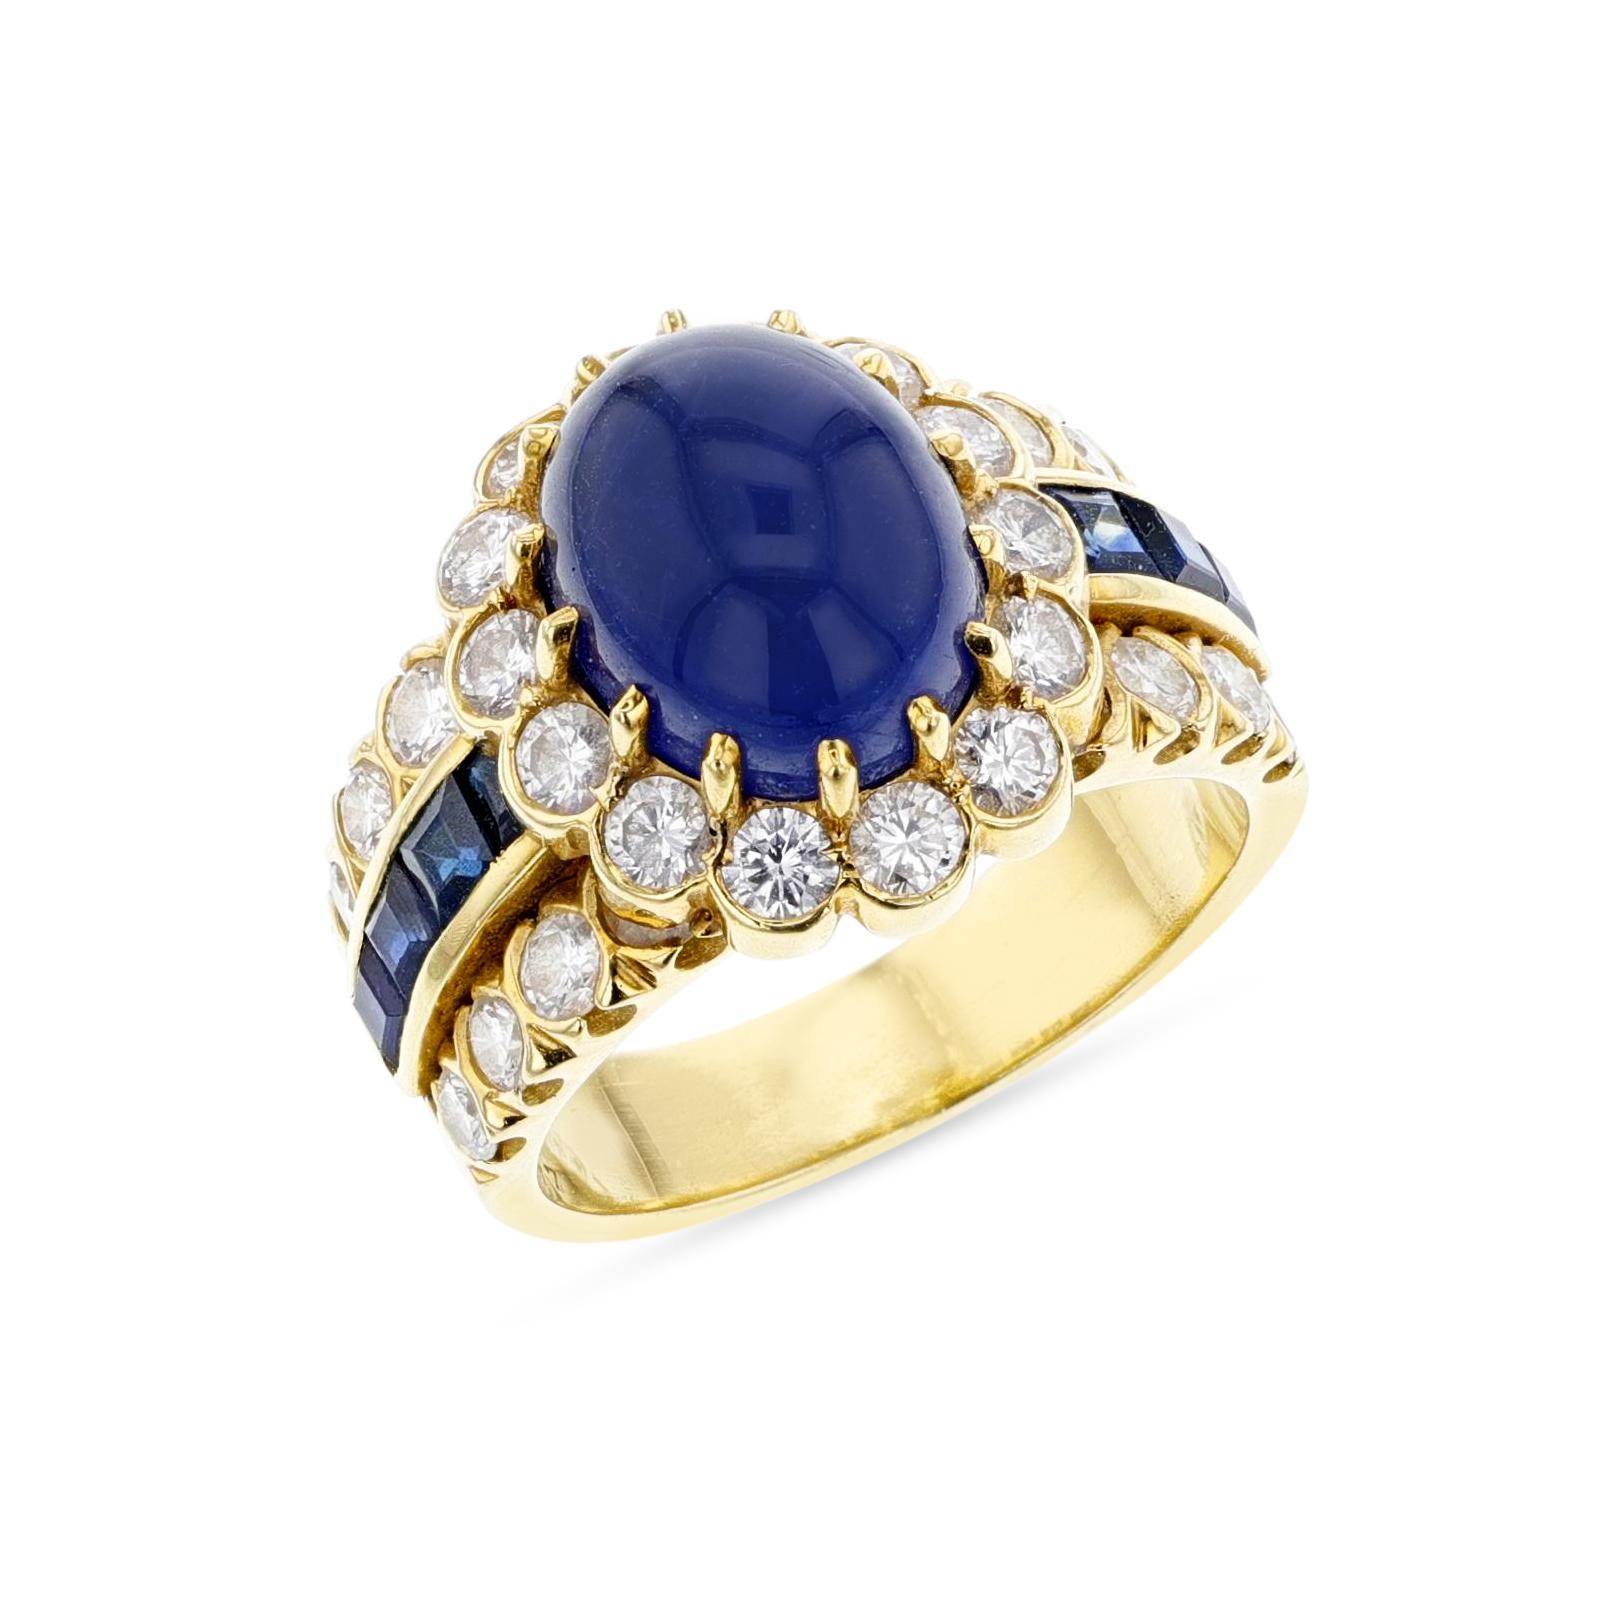 An elegant sapphire and diamond gold ring by Van Cleef & Arpels. The ring is set with a natural sapphire (weighing approximately 5 carats and measuring 10.50 x 8.50 mm), which is accented with a cluster of round brilliant-cut diamonds (weighing